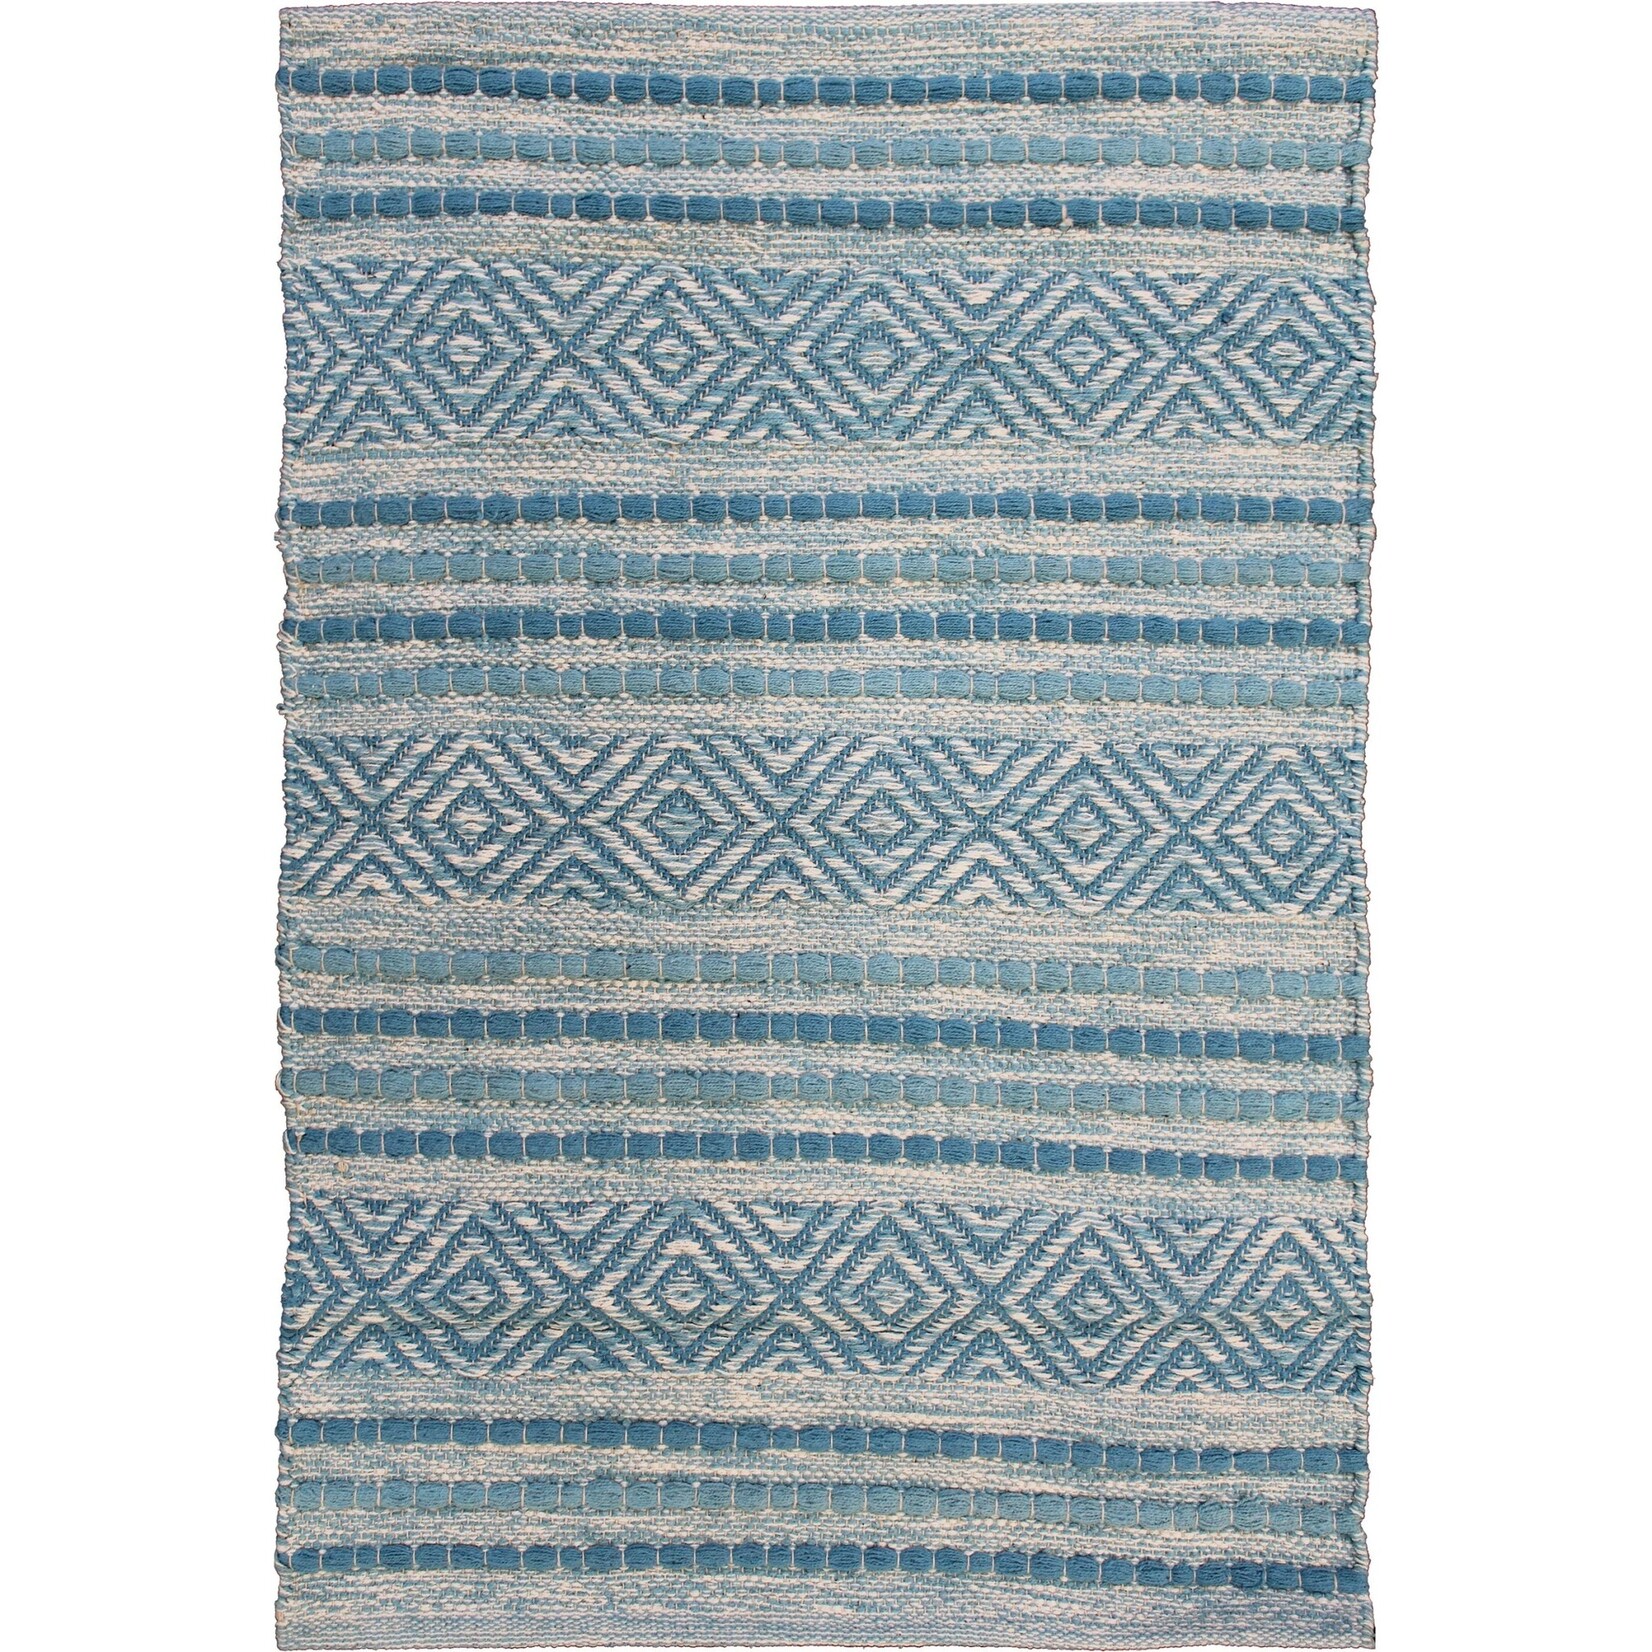 Dhurrie - Fusion Ice Blue - 2' x 3'